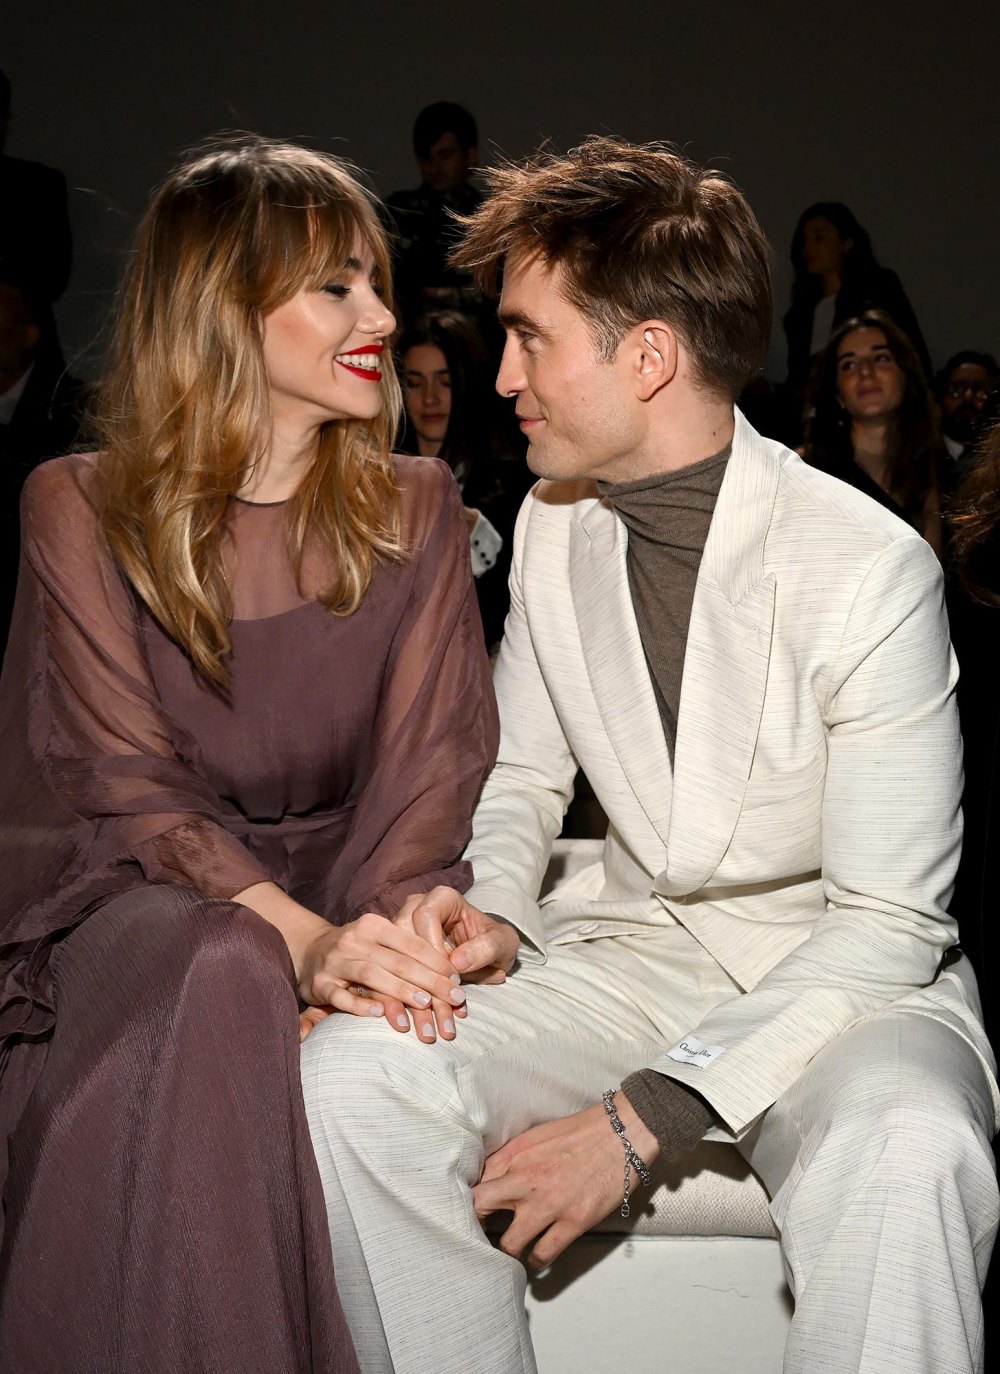 Suki Waterhouse's Subtle Mentions About Her and Robert Pattinson’s Romance: Songs and Quotes